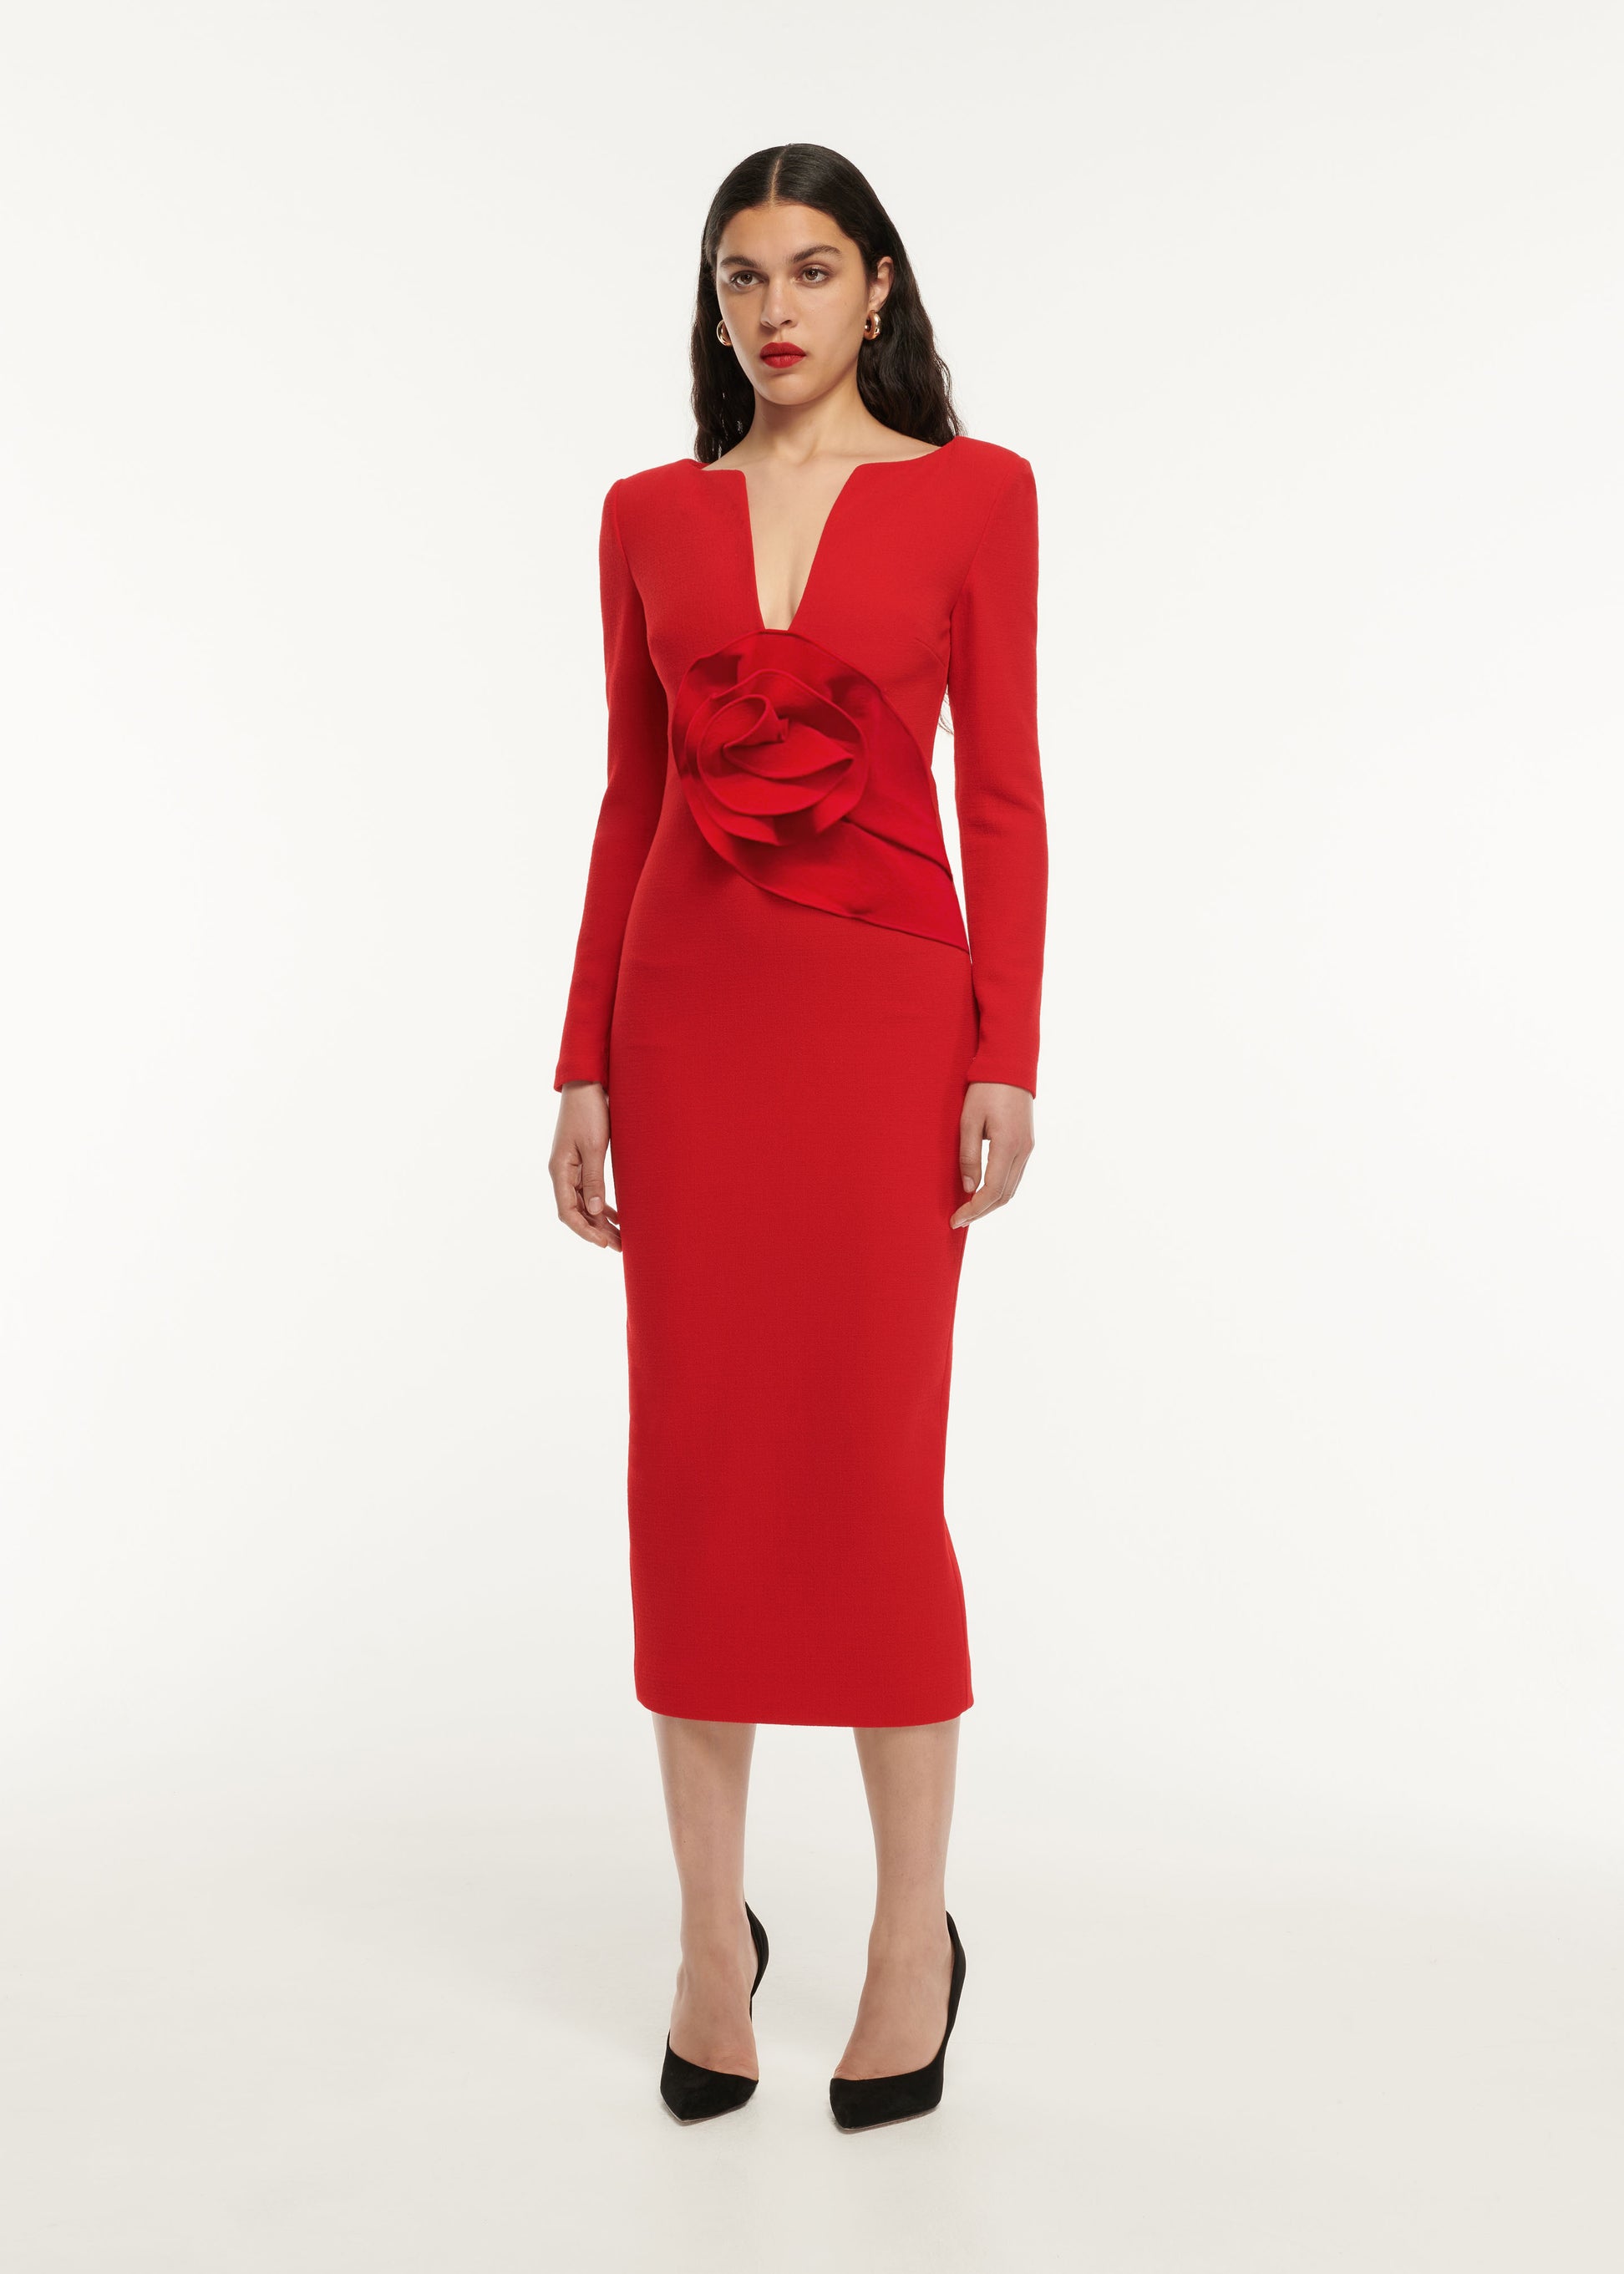 A woman wearing the Long Sleeve Wool Crepe Midi Dress in Red